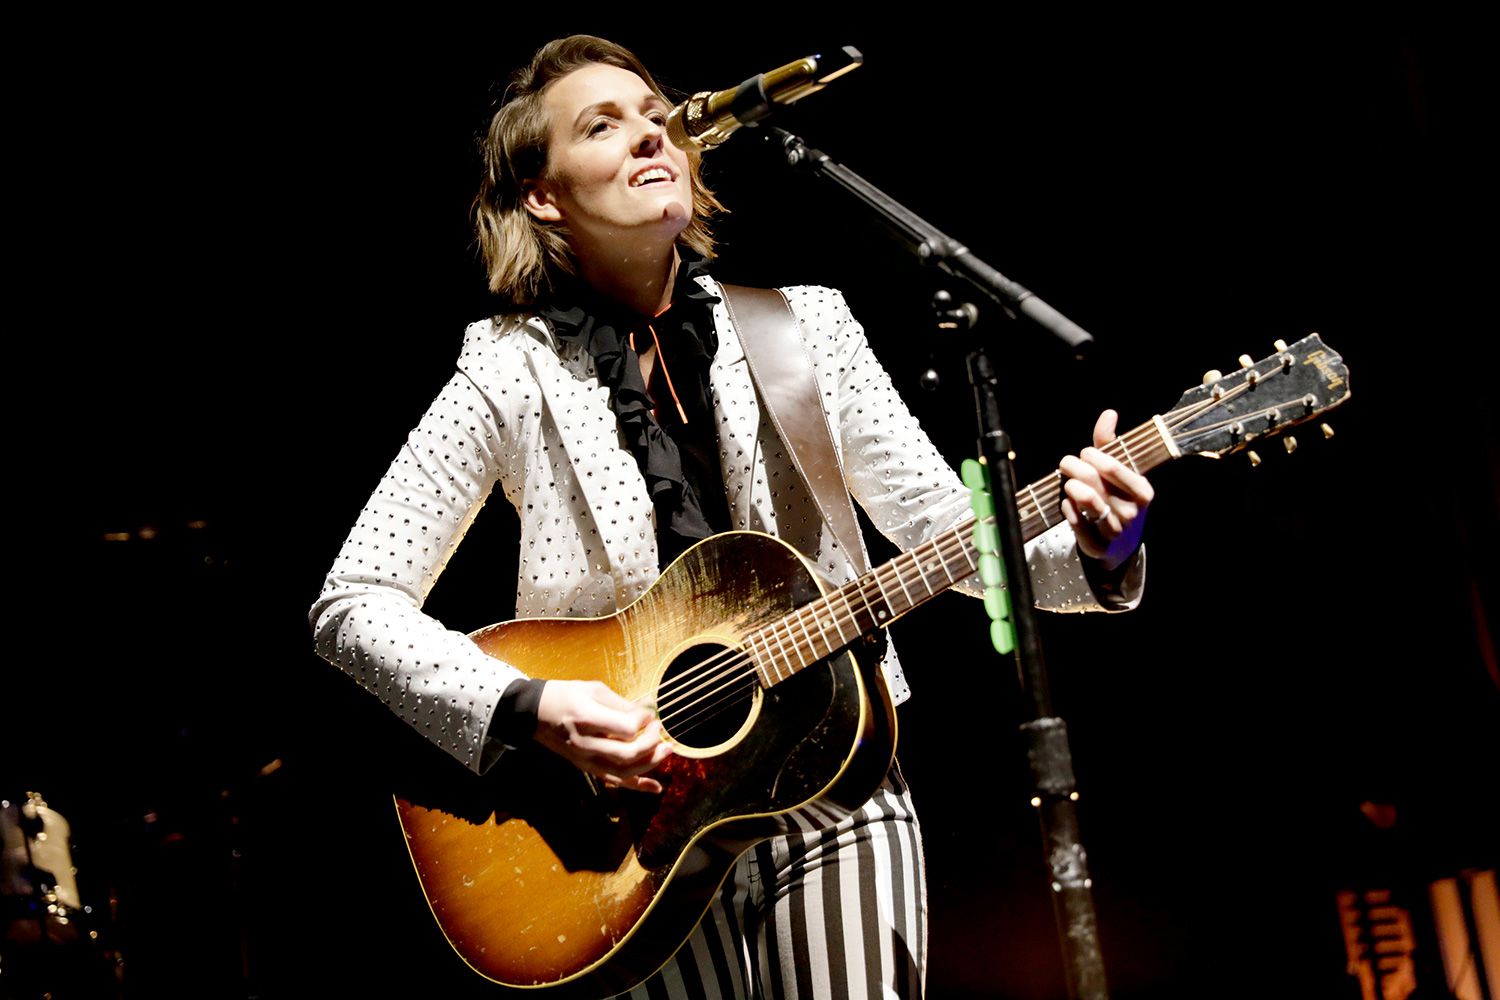 Brandi Carlile performs onstage as Citi Sound Vault Presents Brandi Carlile Live During The Biggest Week in Music at Hollywood Palladium on January 23, 2020 in Los Angeles, California